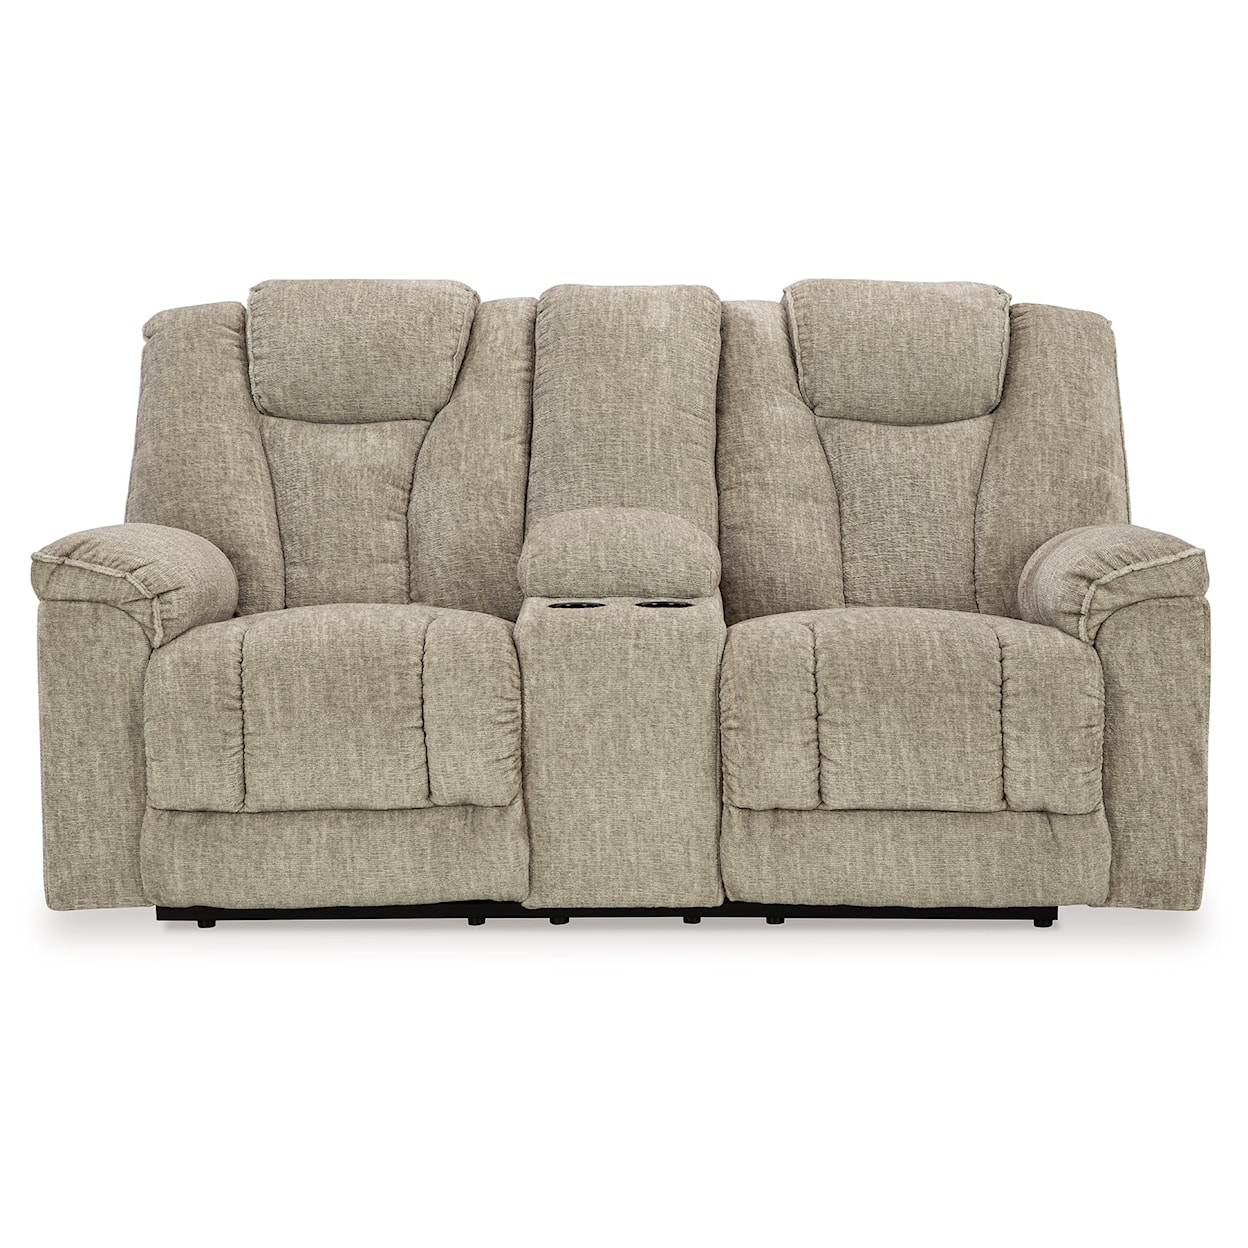 Signature Hindmarsh Power Reclining Loveseat With Console